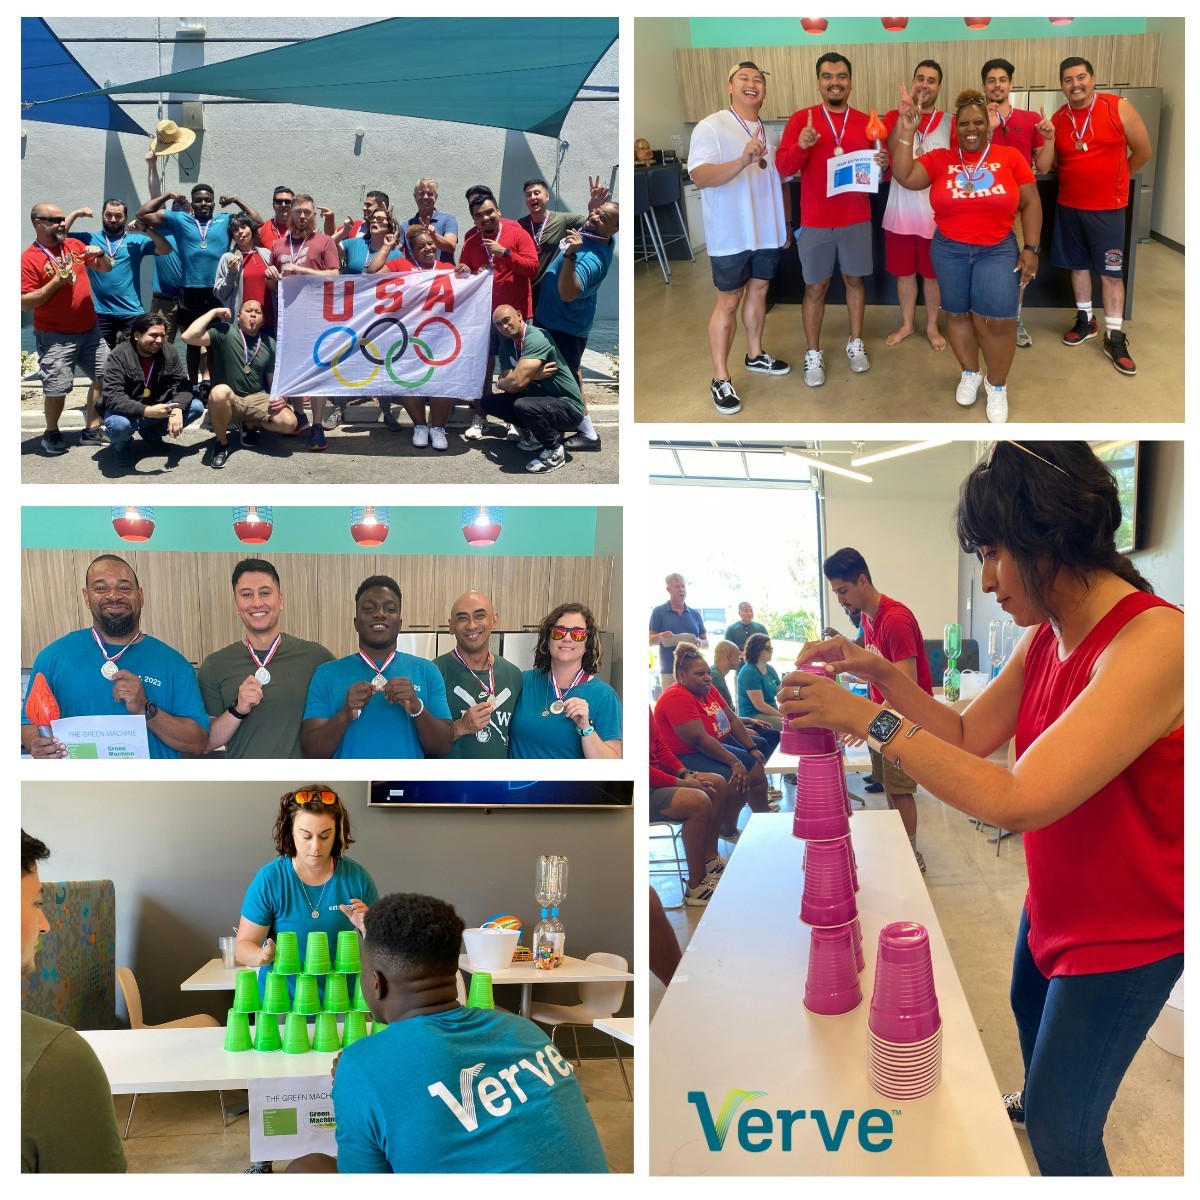 Verve Summer Olympics - Minute To Win It - building community and connection.